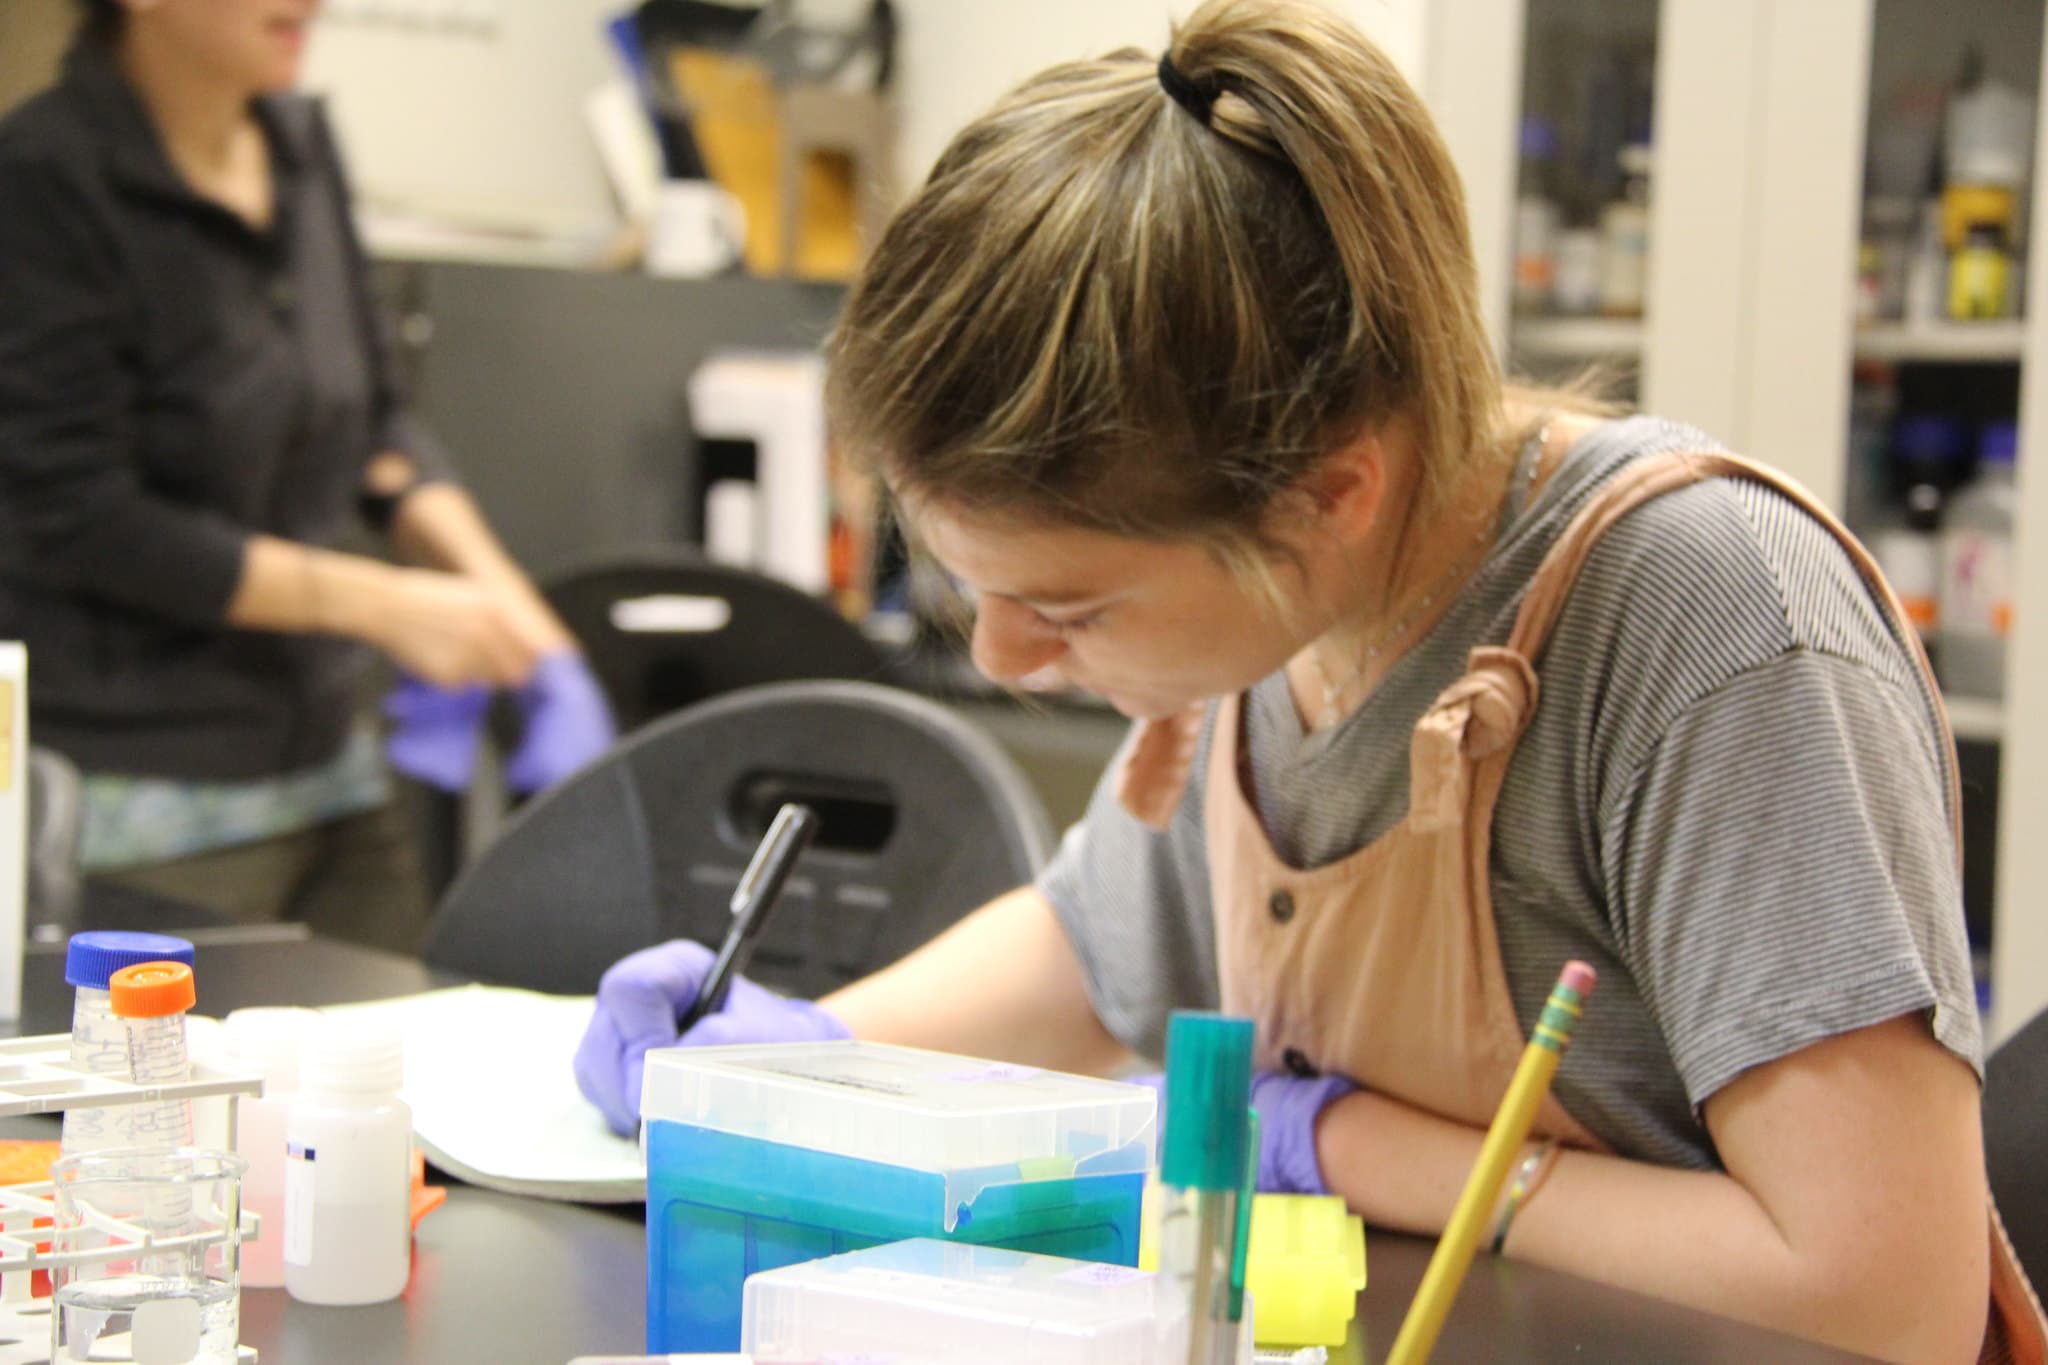 A young girl leans over a notepad writing in a Vermont State University Biology lab.